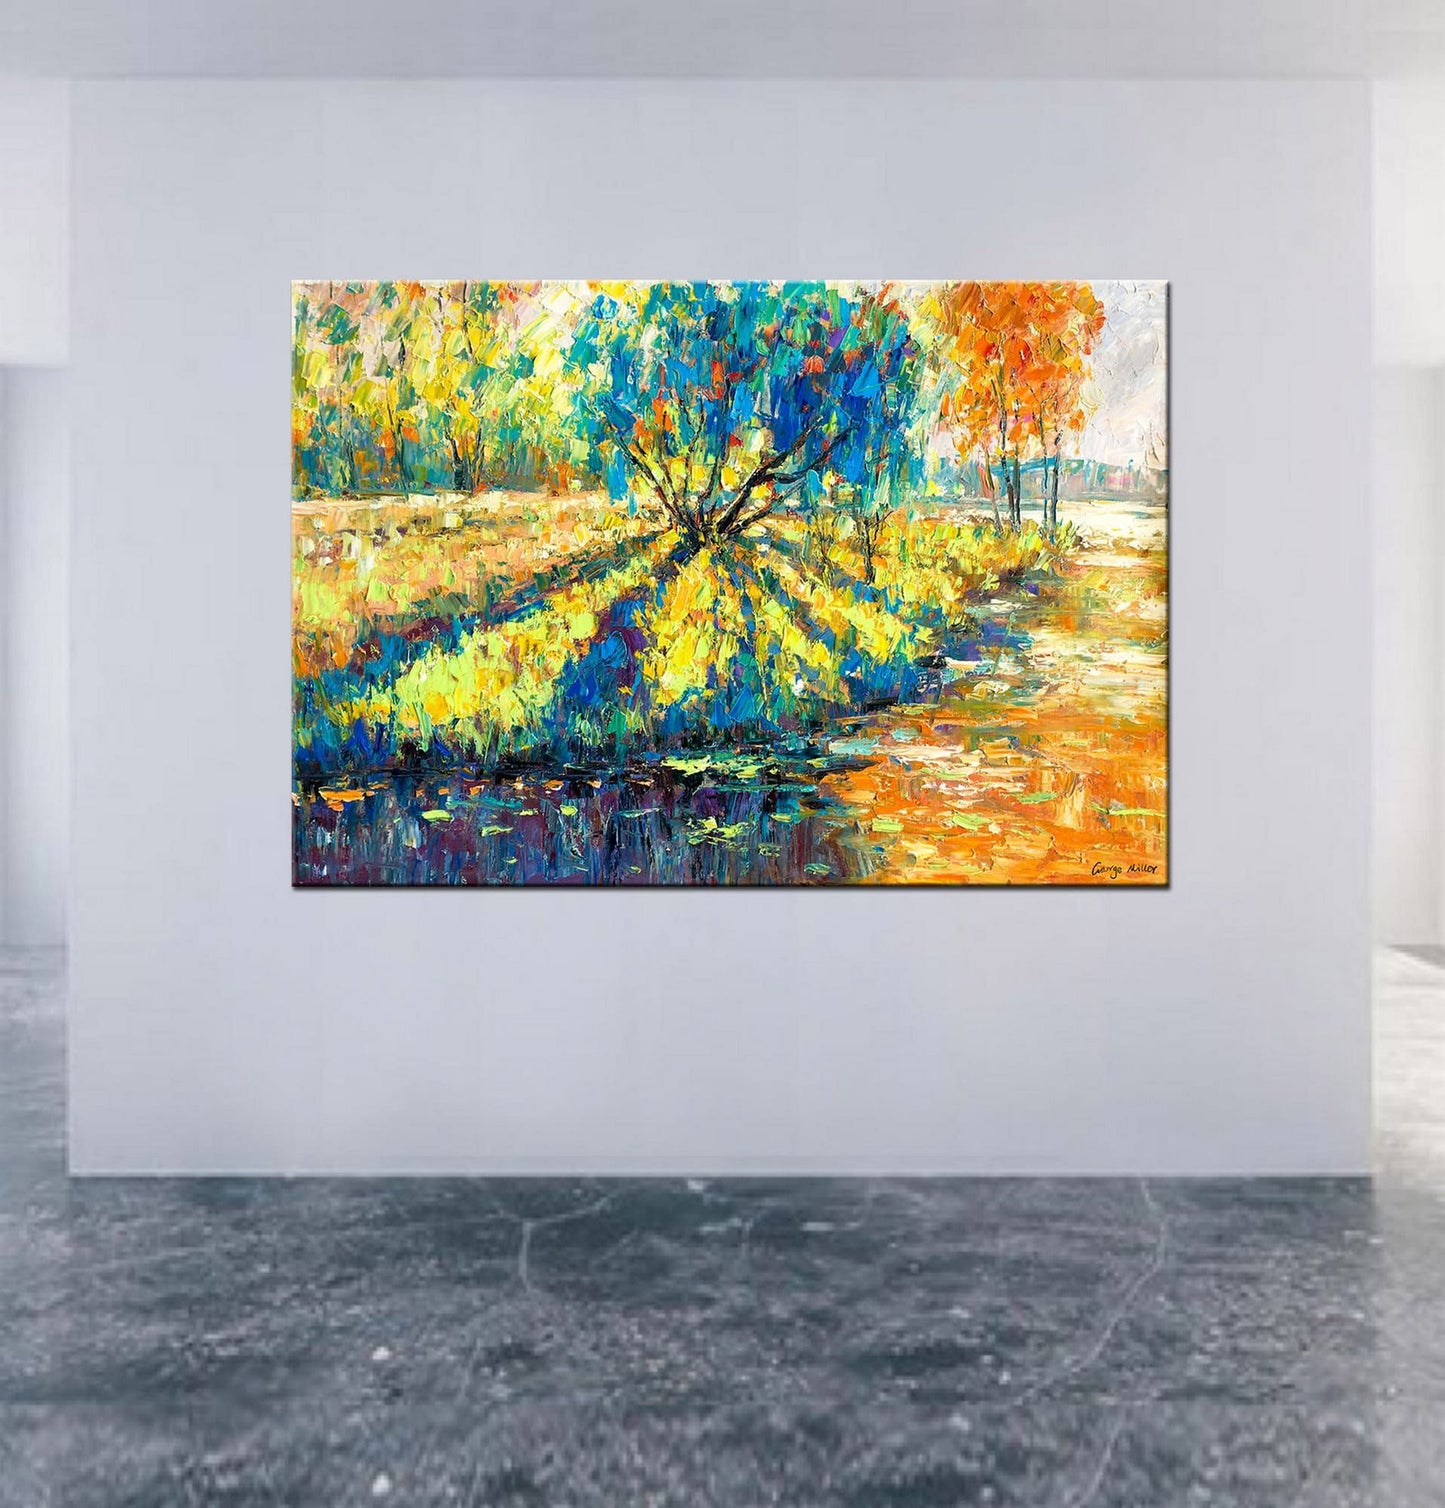 Landscape Oil Painting By The River, Canvas Painting, Paintings On Canvas, Landscape, Oversized Art, Impressionist Art, Impasto Oil Painting